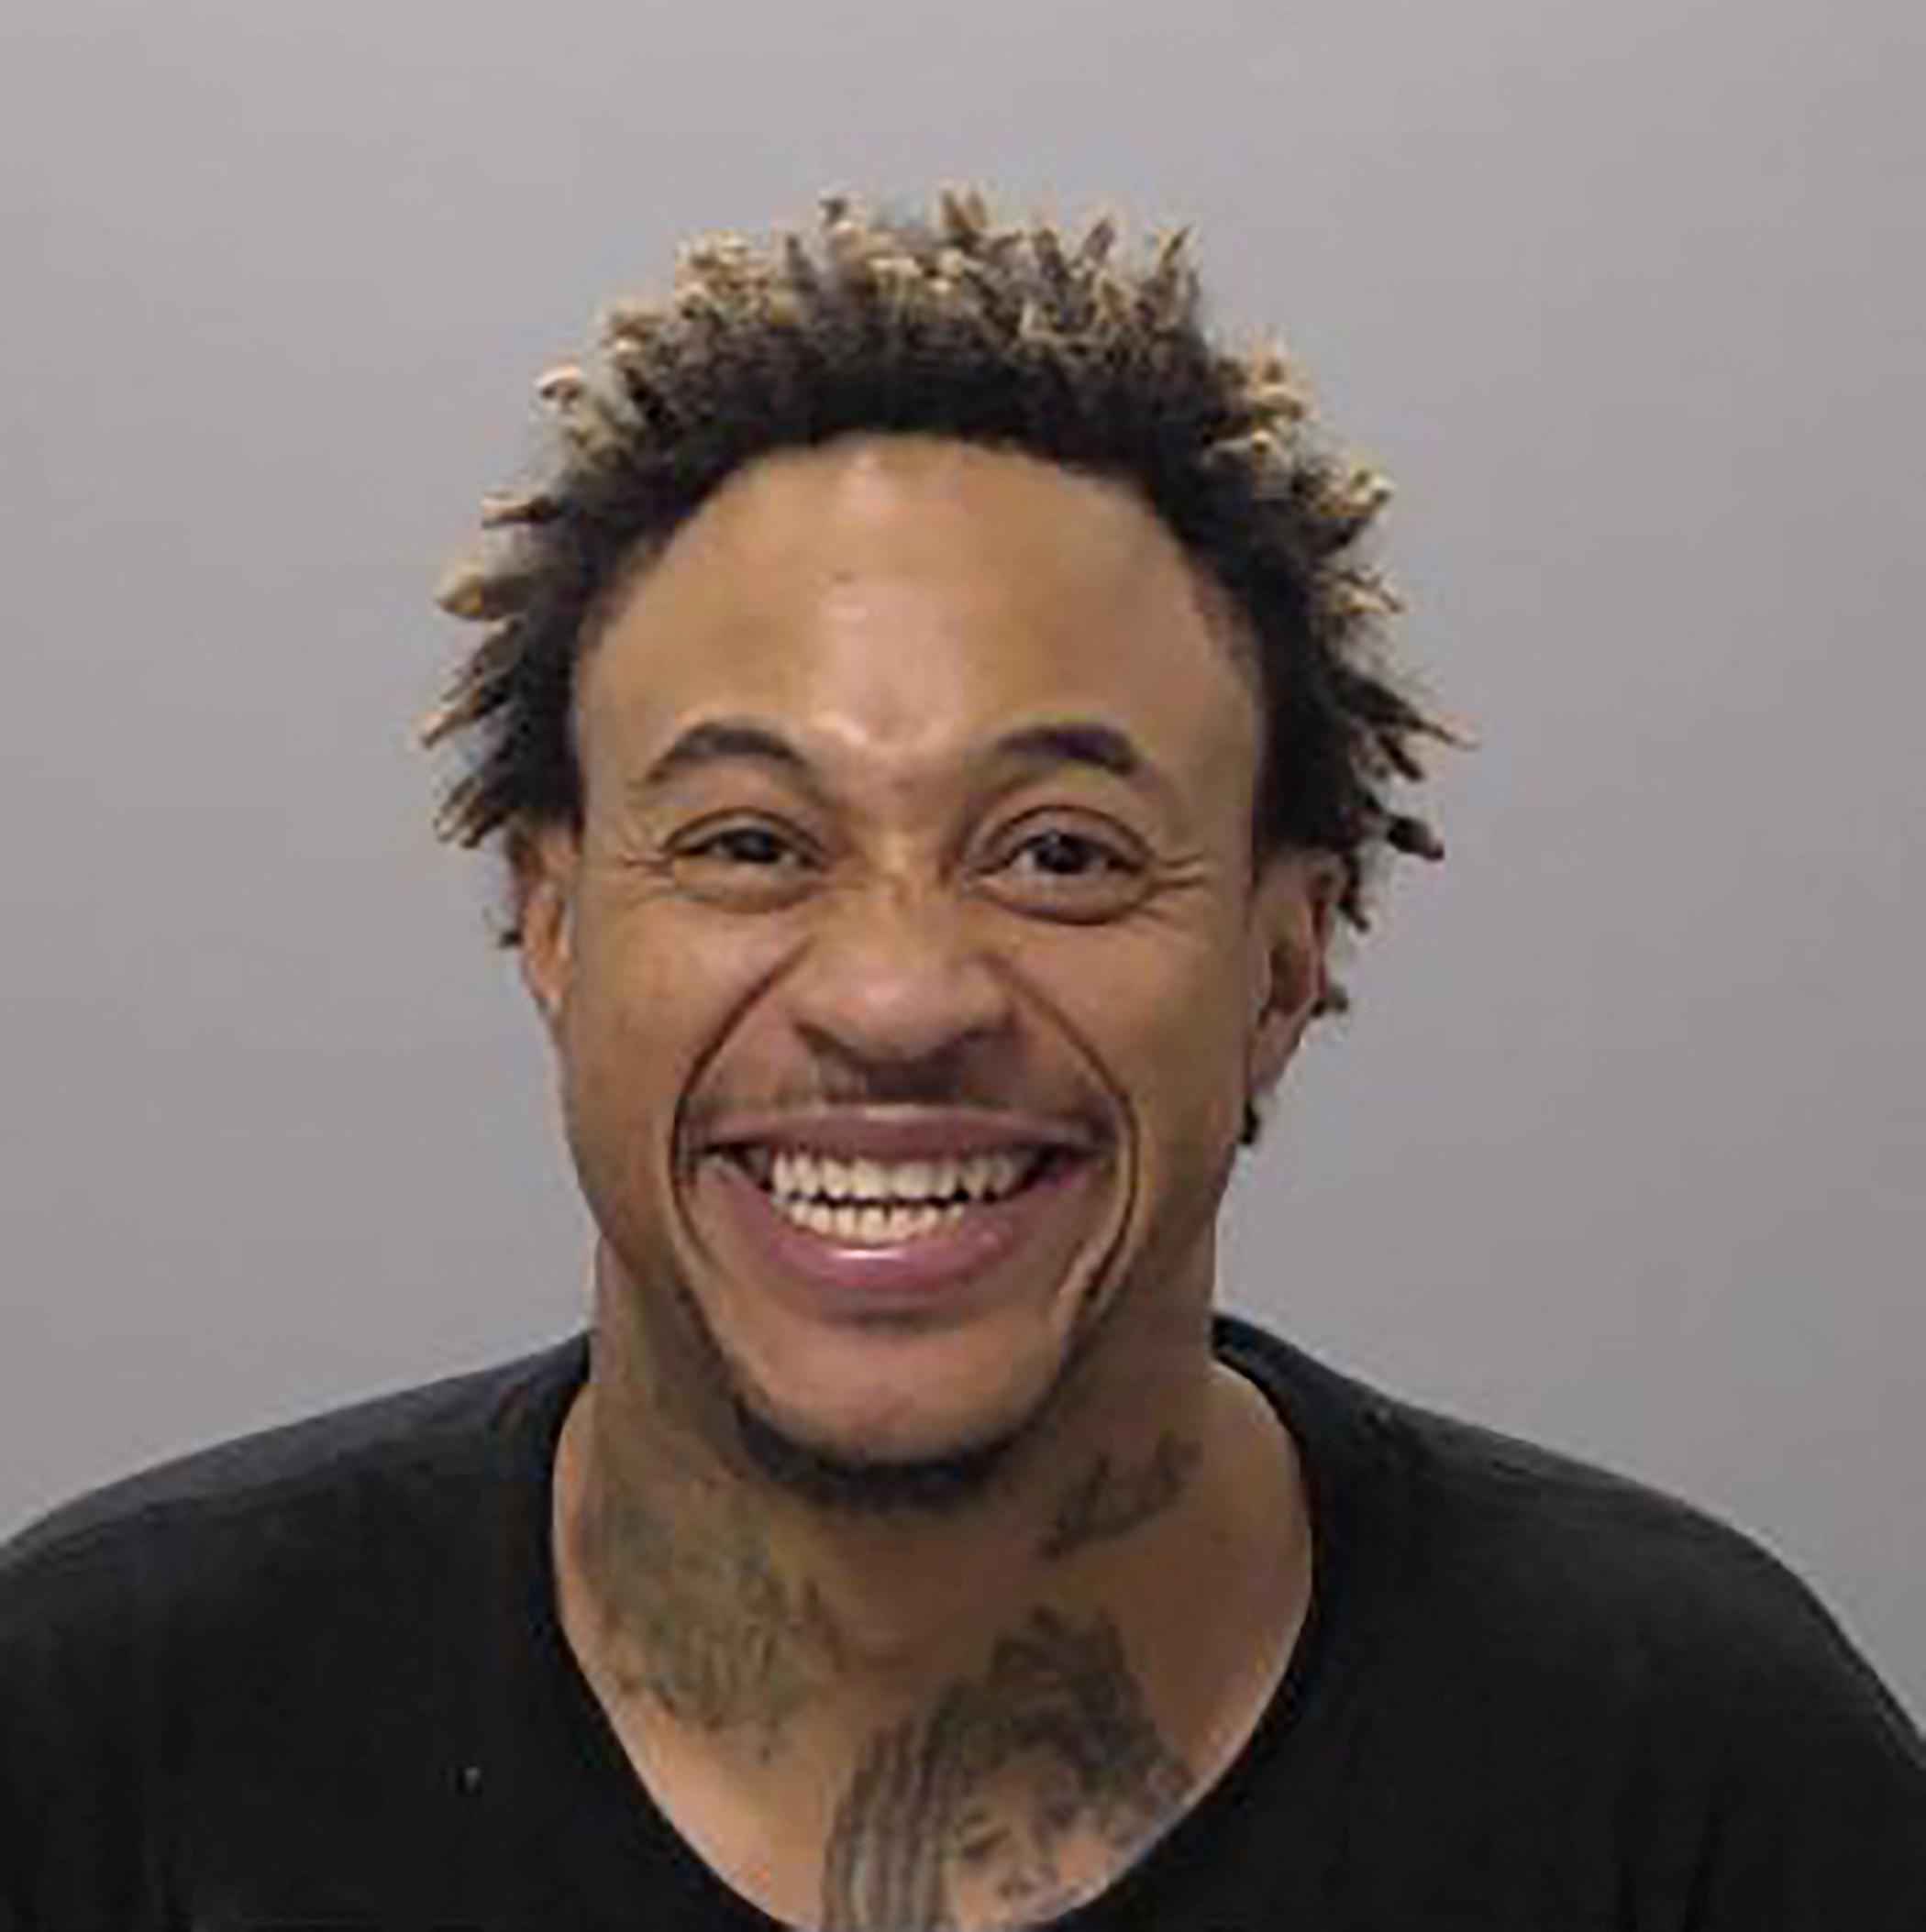 Thats So Raven star Orlando Brown is smiling after being arrested on domestic violence charges.